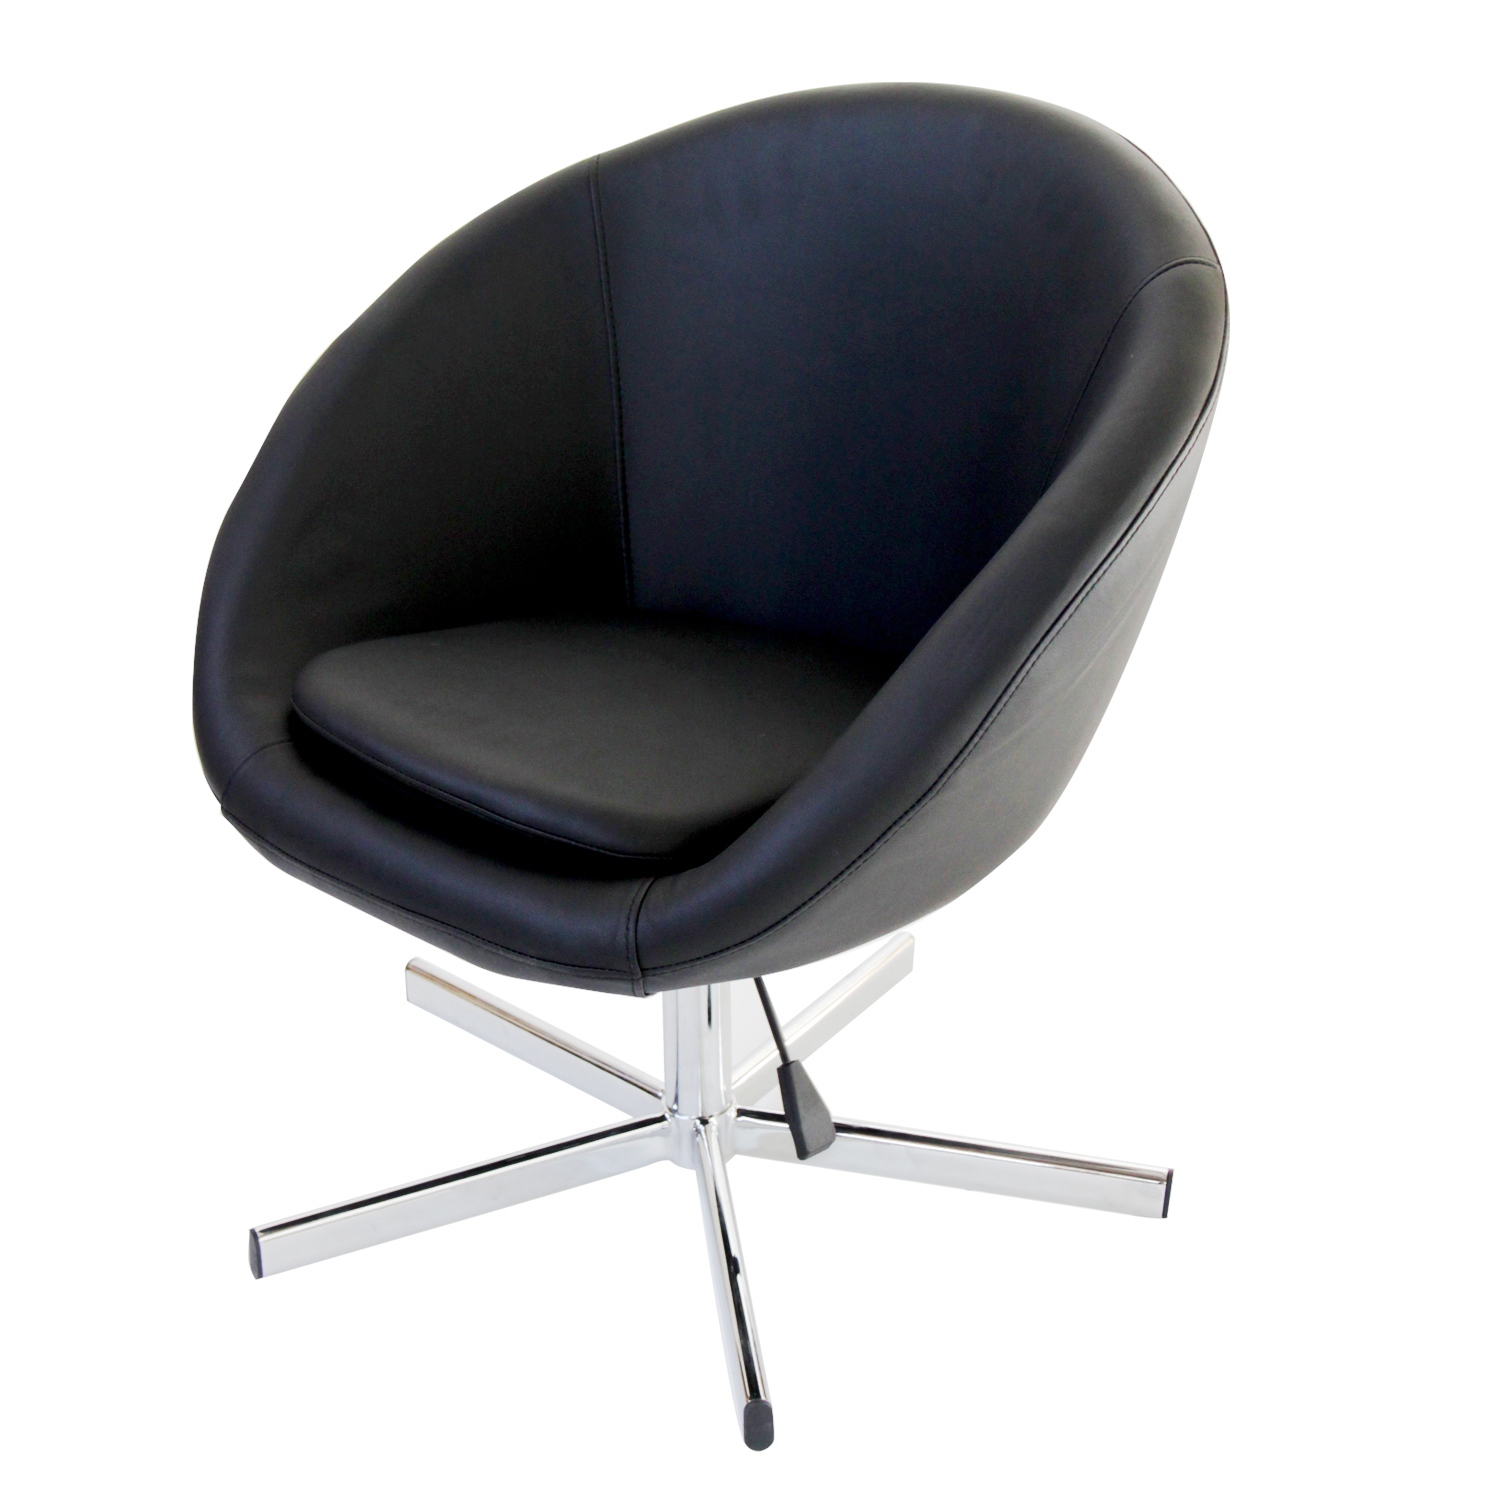 chair hire - Furniture Hire Auckland